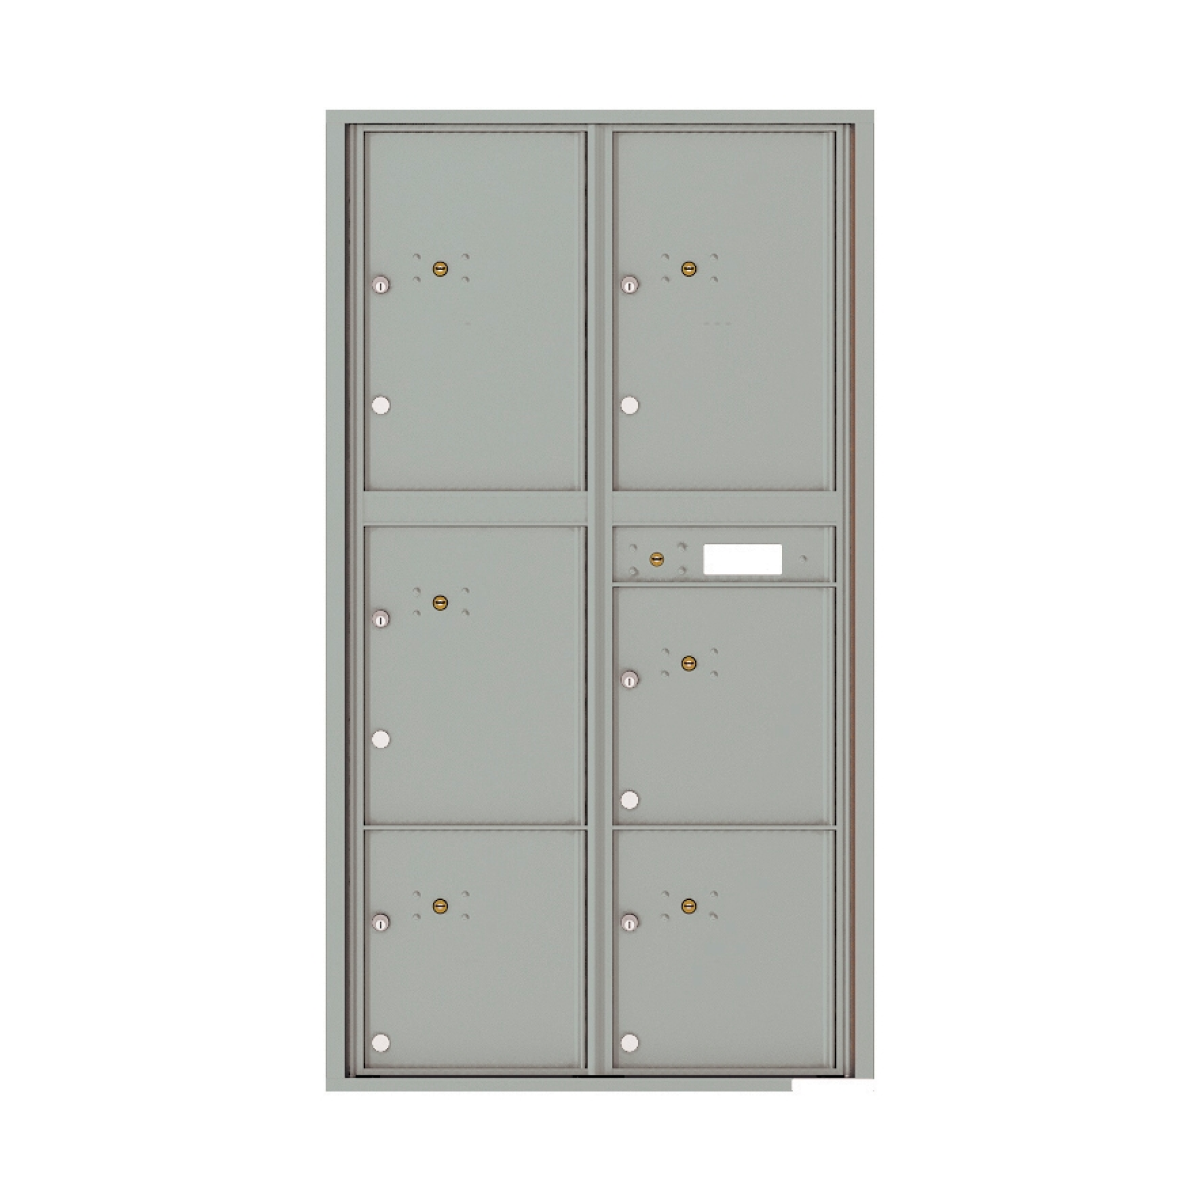 Recessed 4C Horizontal Mailbox – 6 Parcel Lockers – Front Loading – 4C16D-6P-CK25750 – Private Delivery Product Image